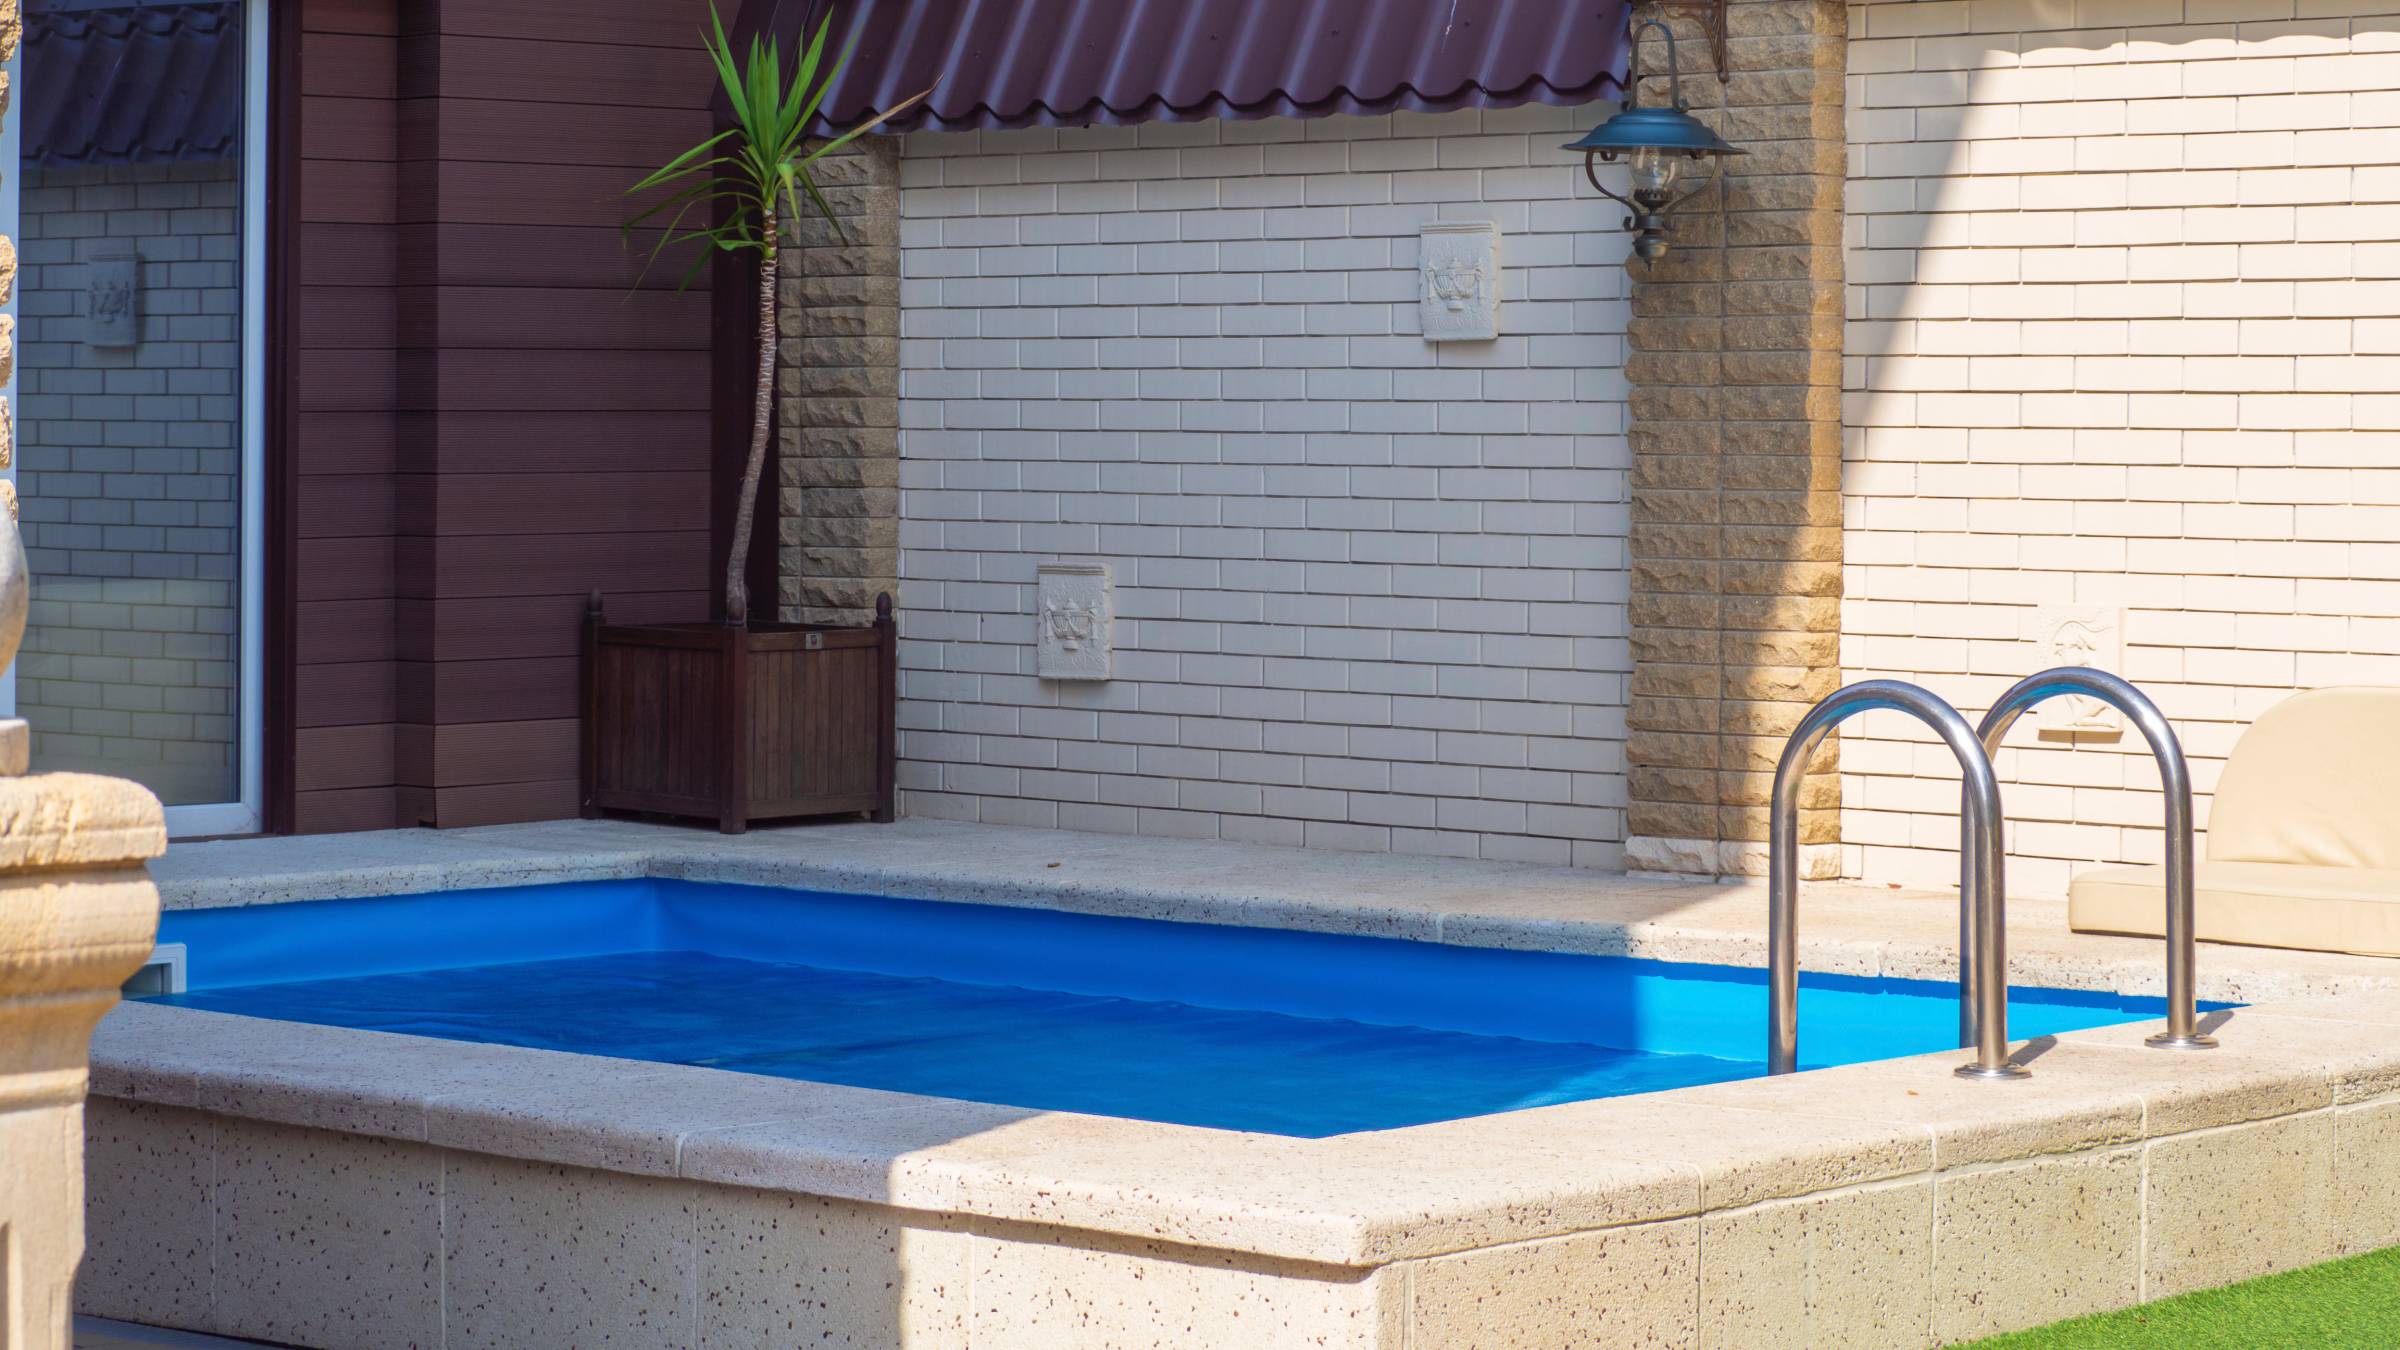 plunge pool in outdoor patio